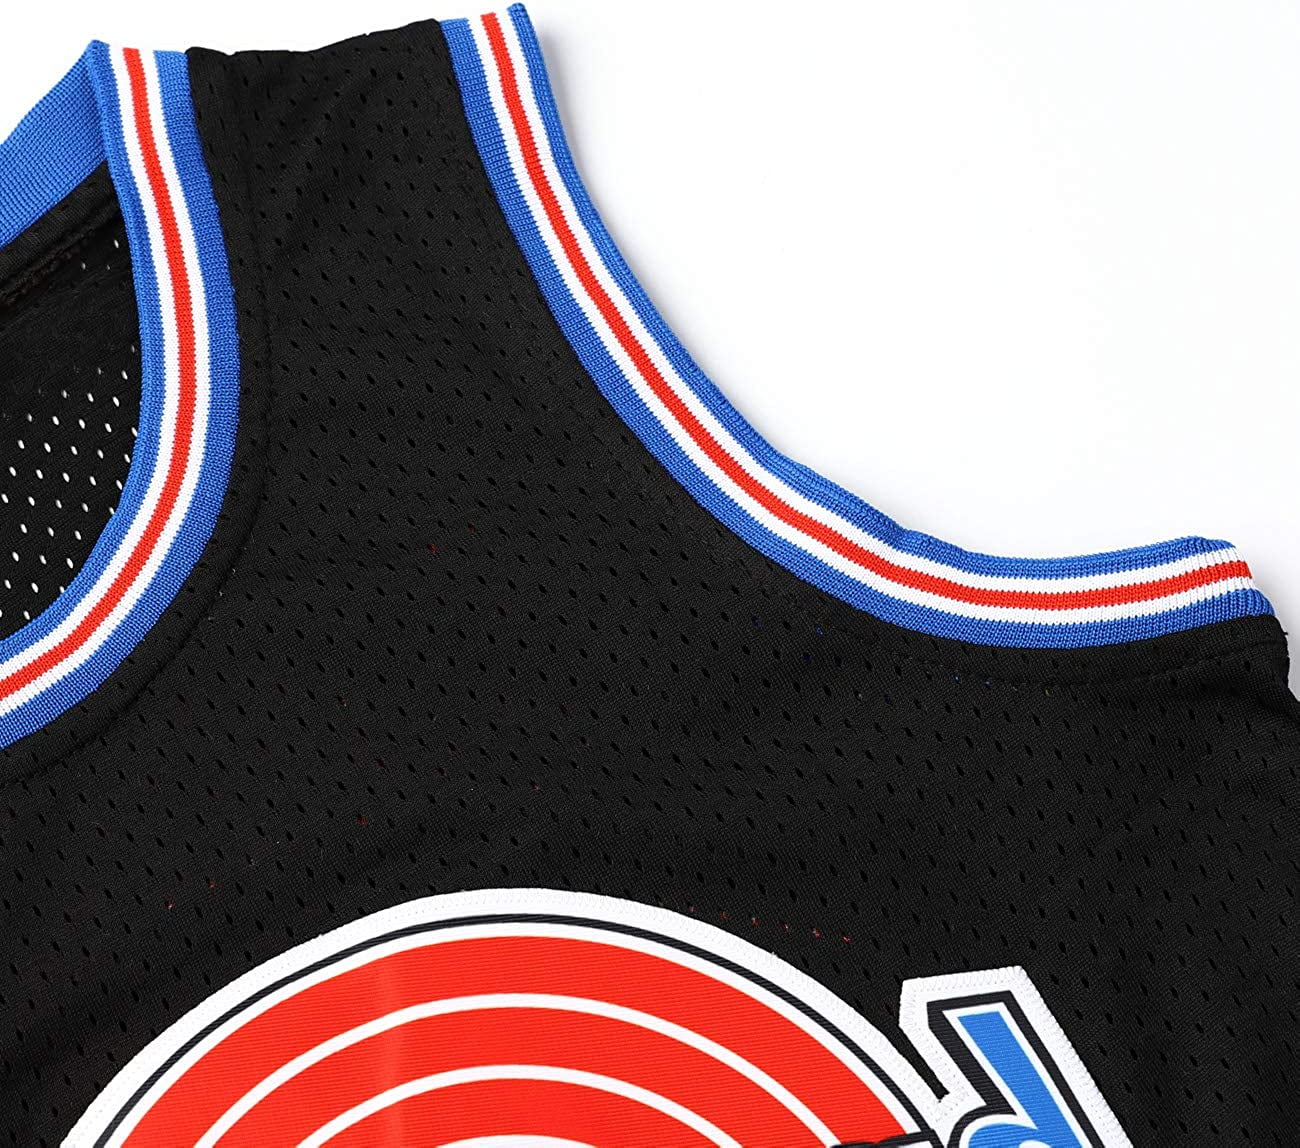  Rxiqeub Youth Basketball Jersey 90s Space Movie Jersey